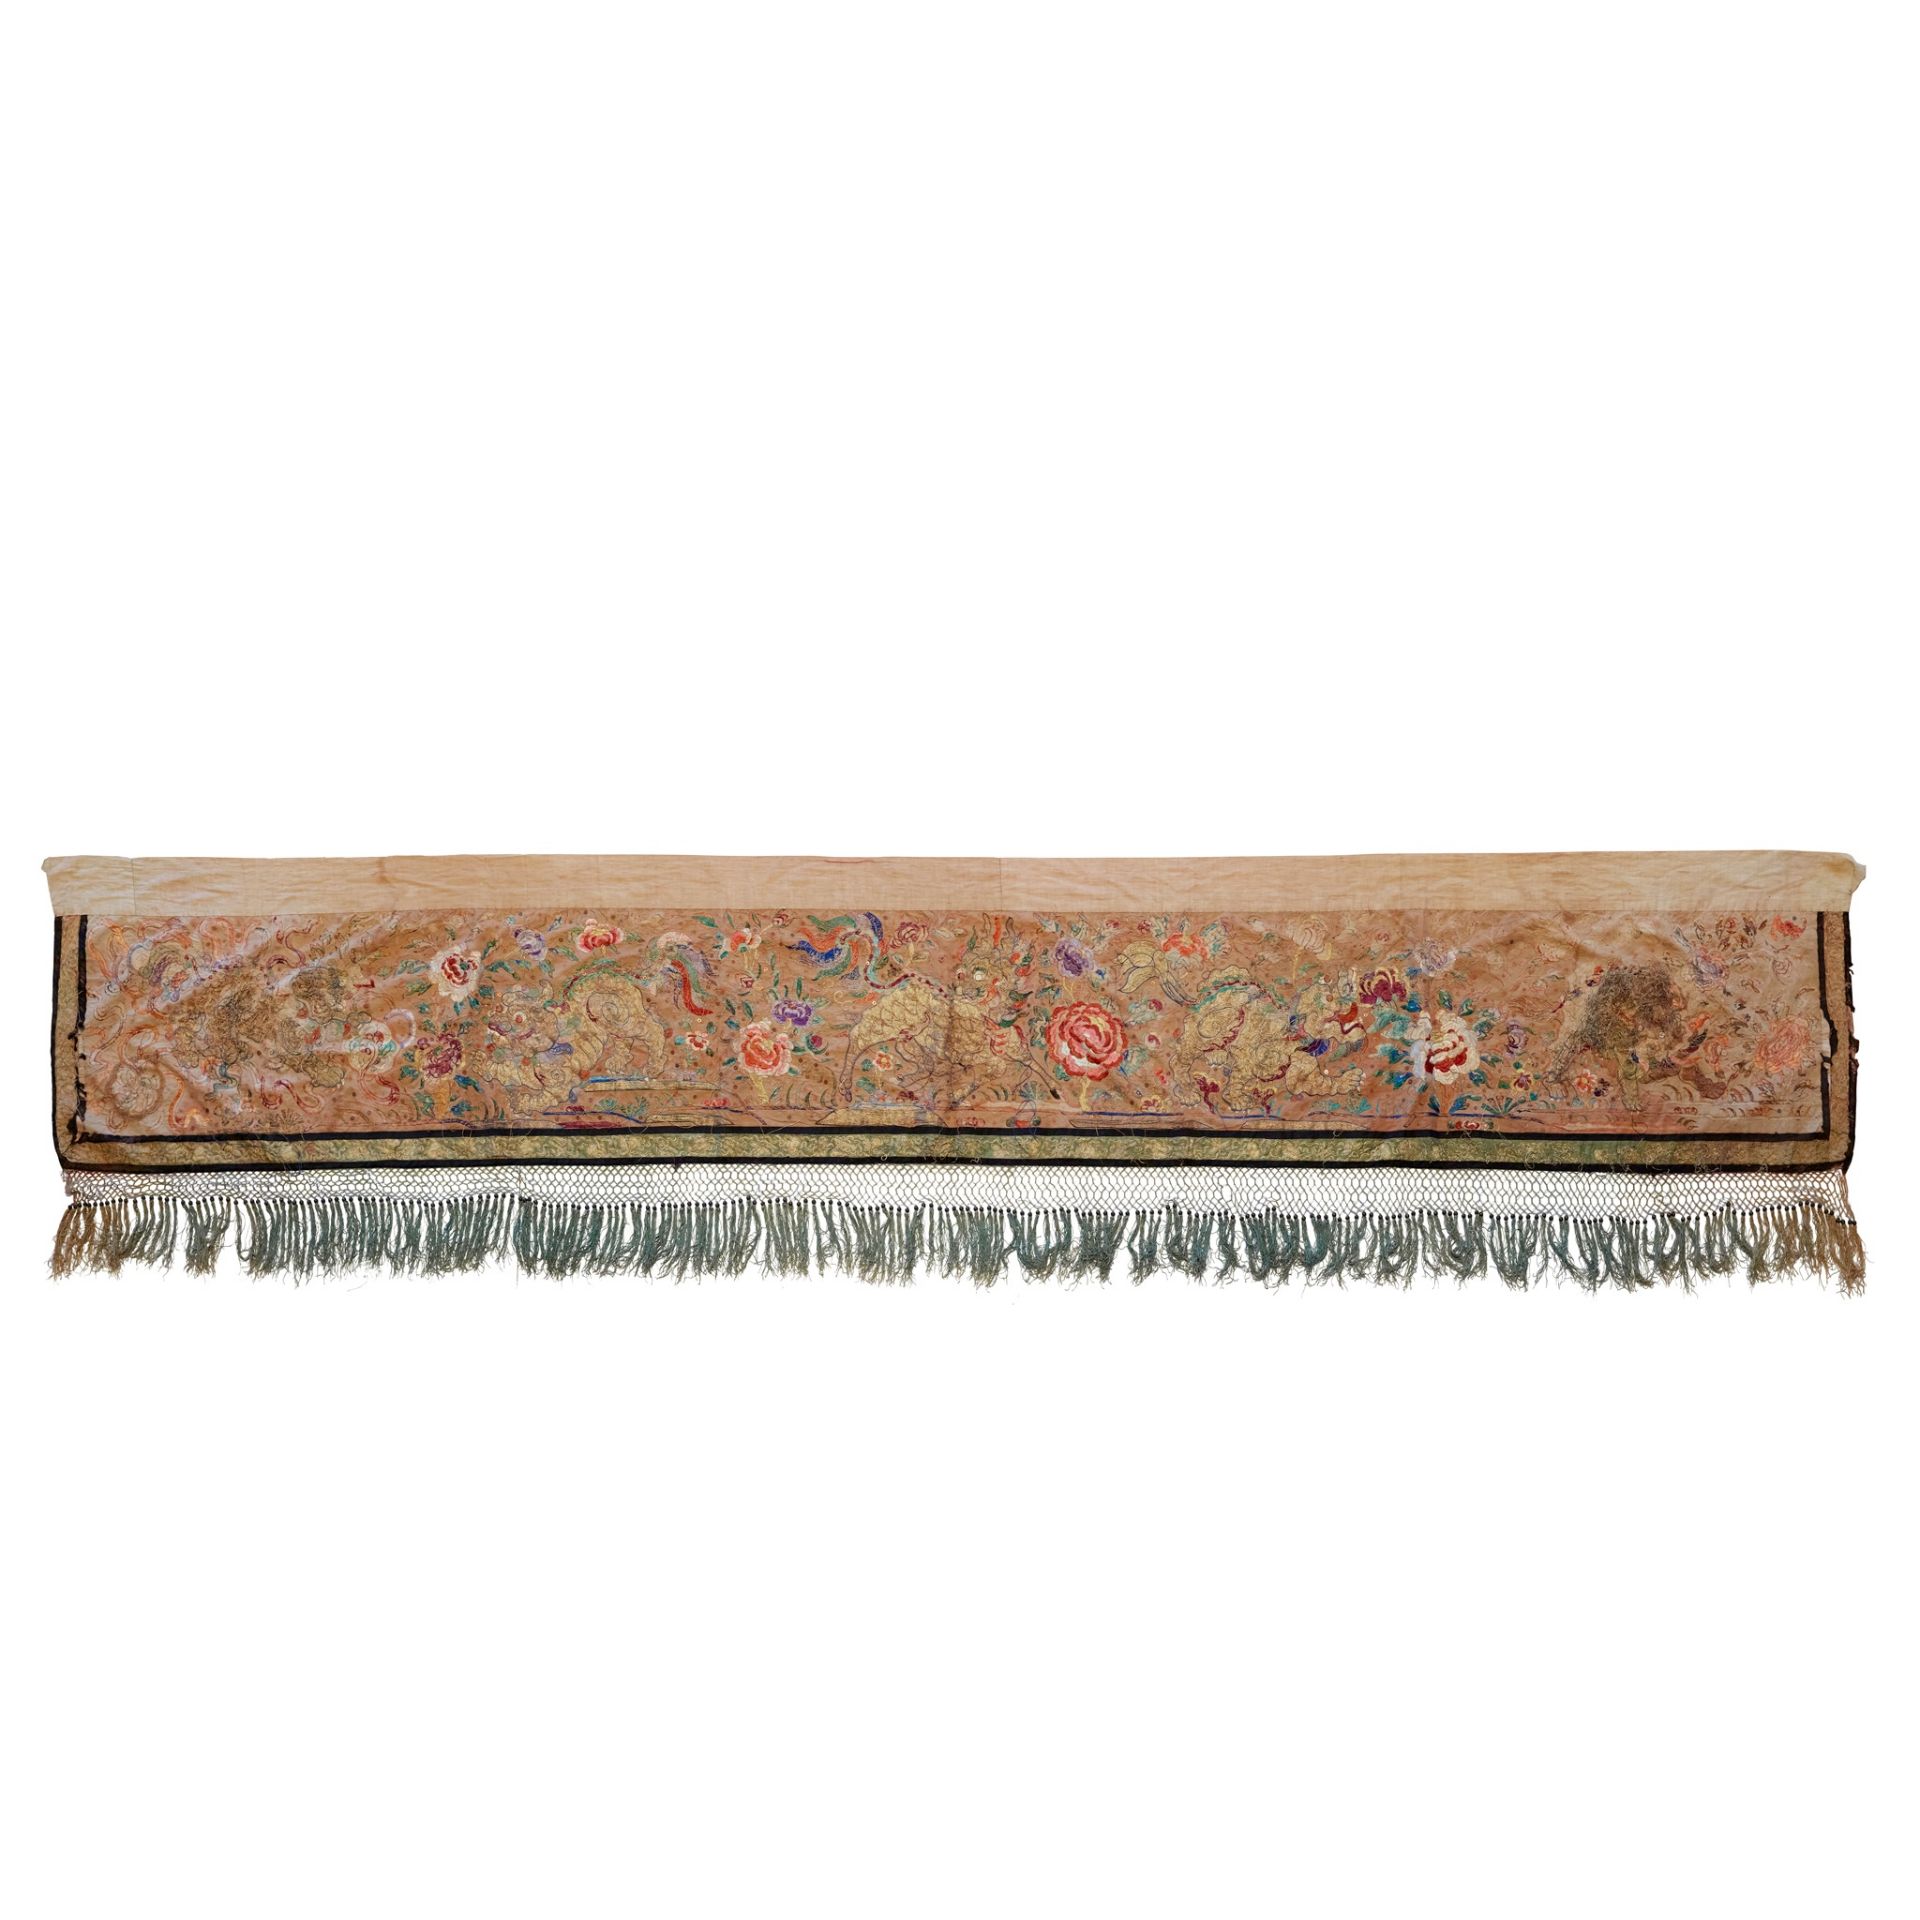 SILK EMBROIDERED BANNER LATE QING DYNASTY-REPUBLIC PERIOD, 19TH-20TH CENTURY